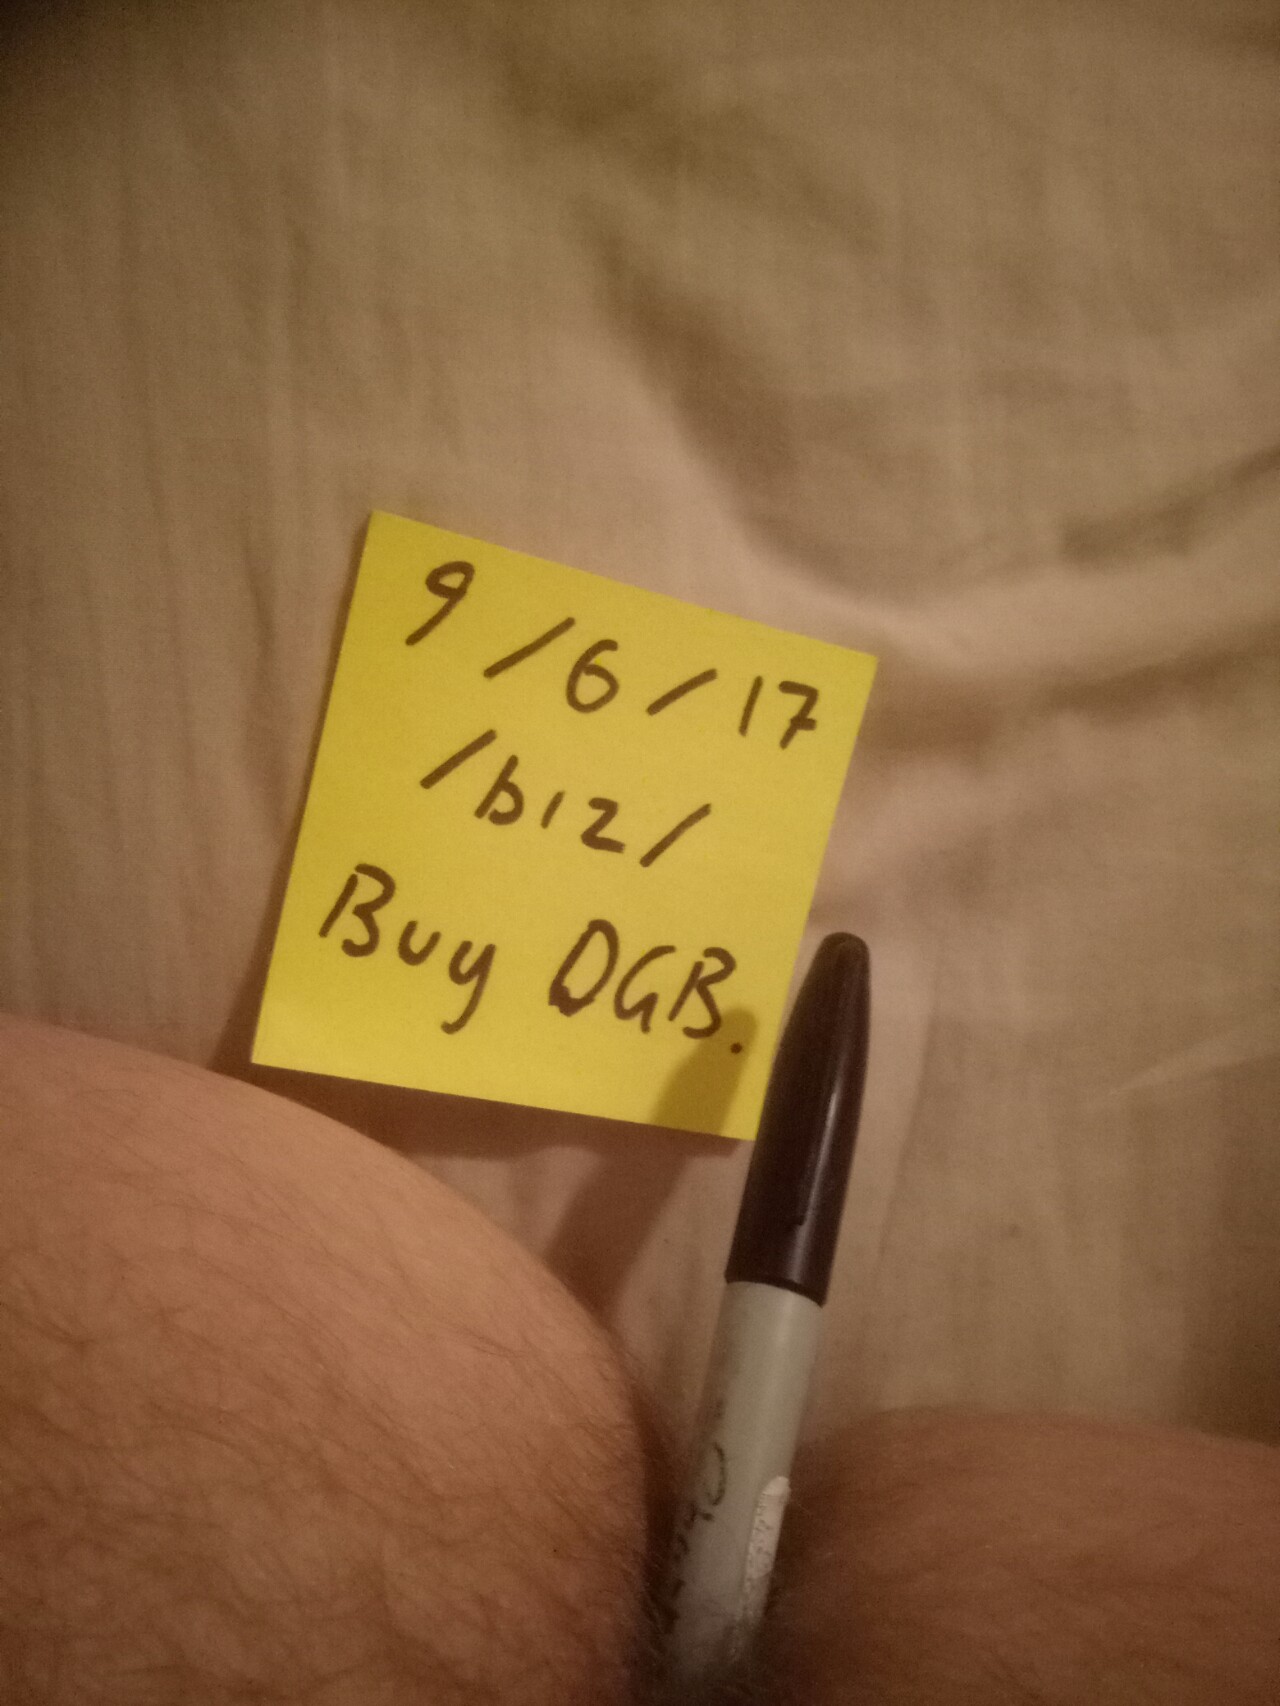 24110628. Not only was I here in 2017 but I stuck a sharpie in my ass for l...